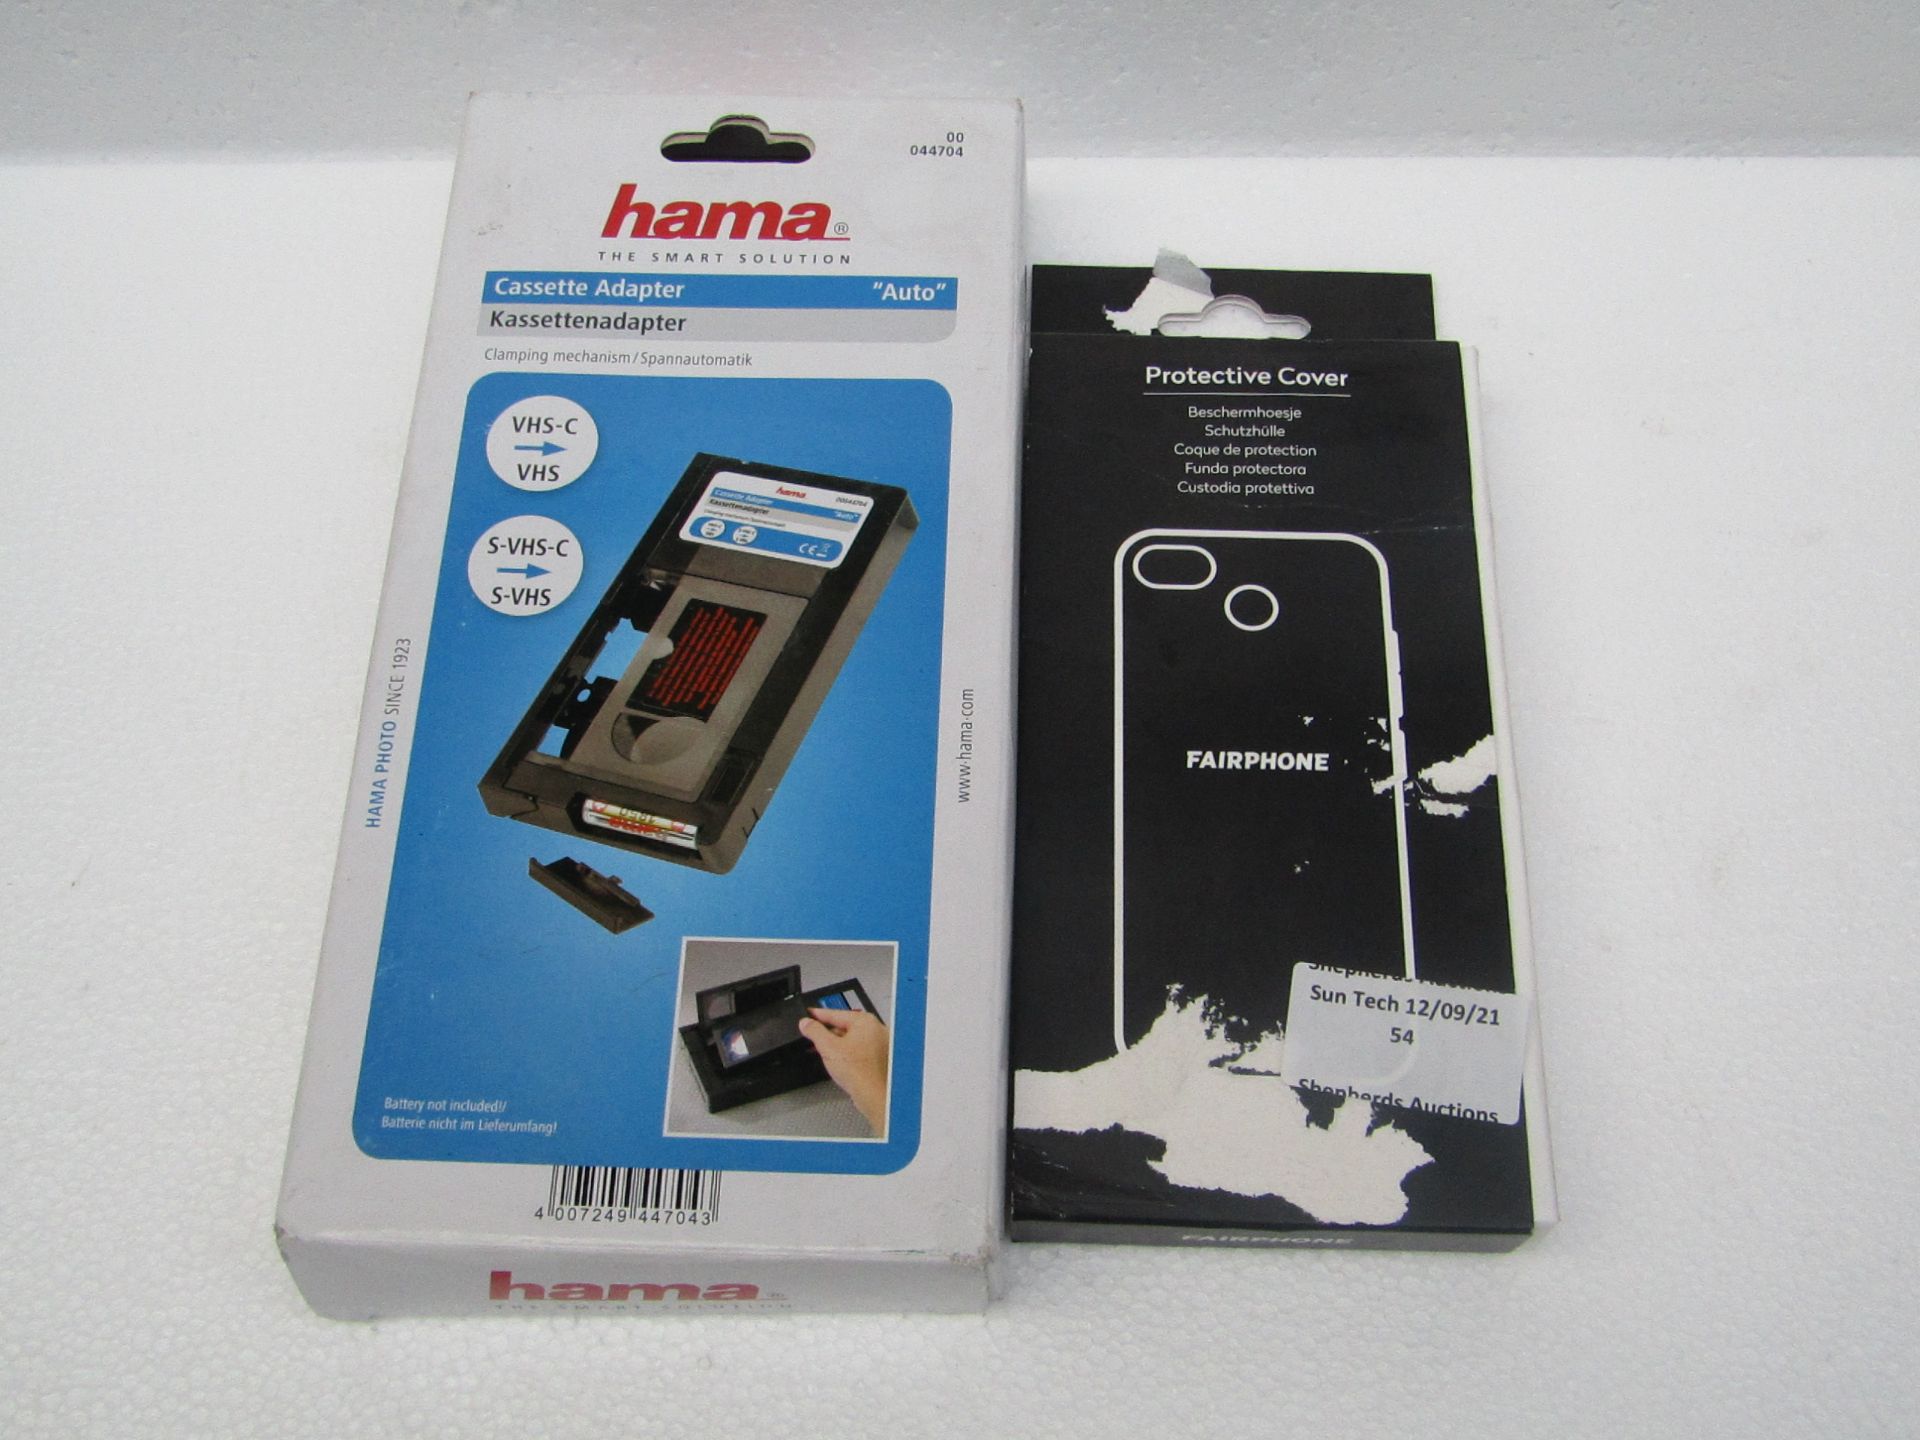 2x Items being; Hama cassette adaptor and a Fairphone protective cover, unchecked.